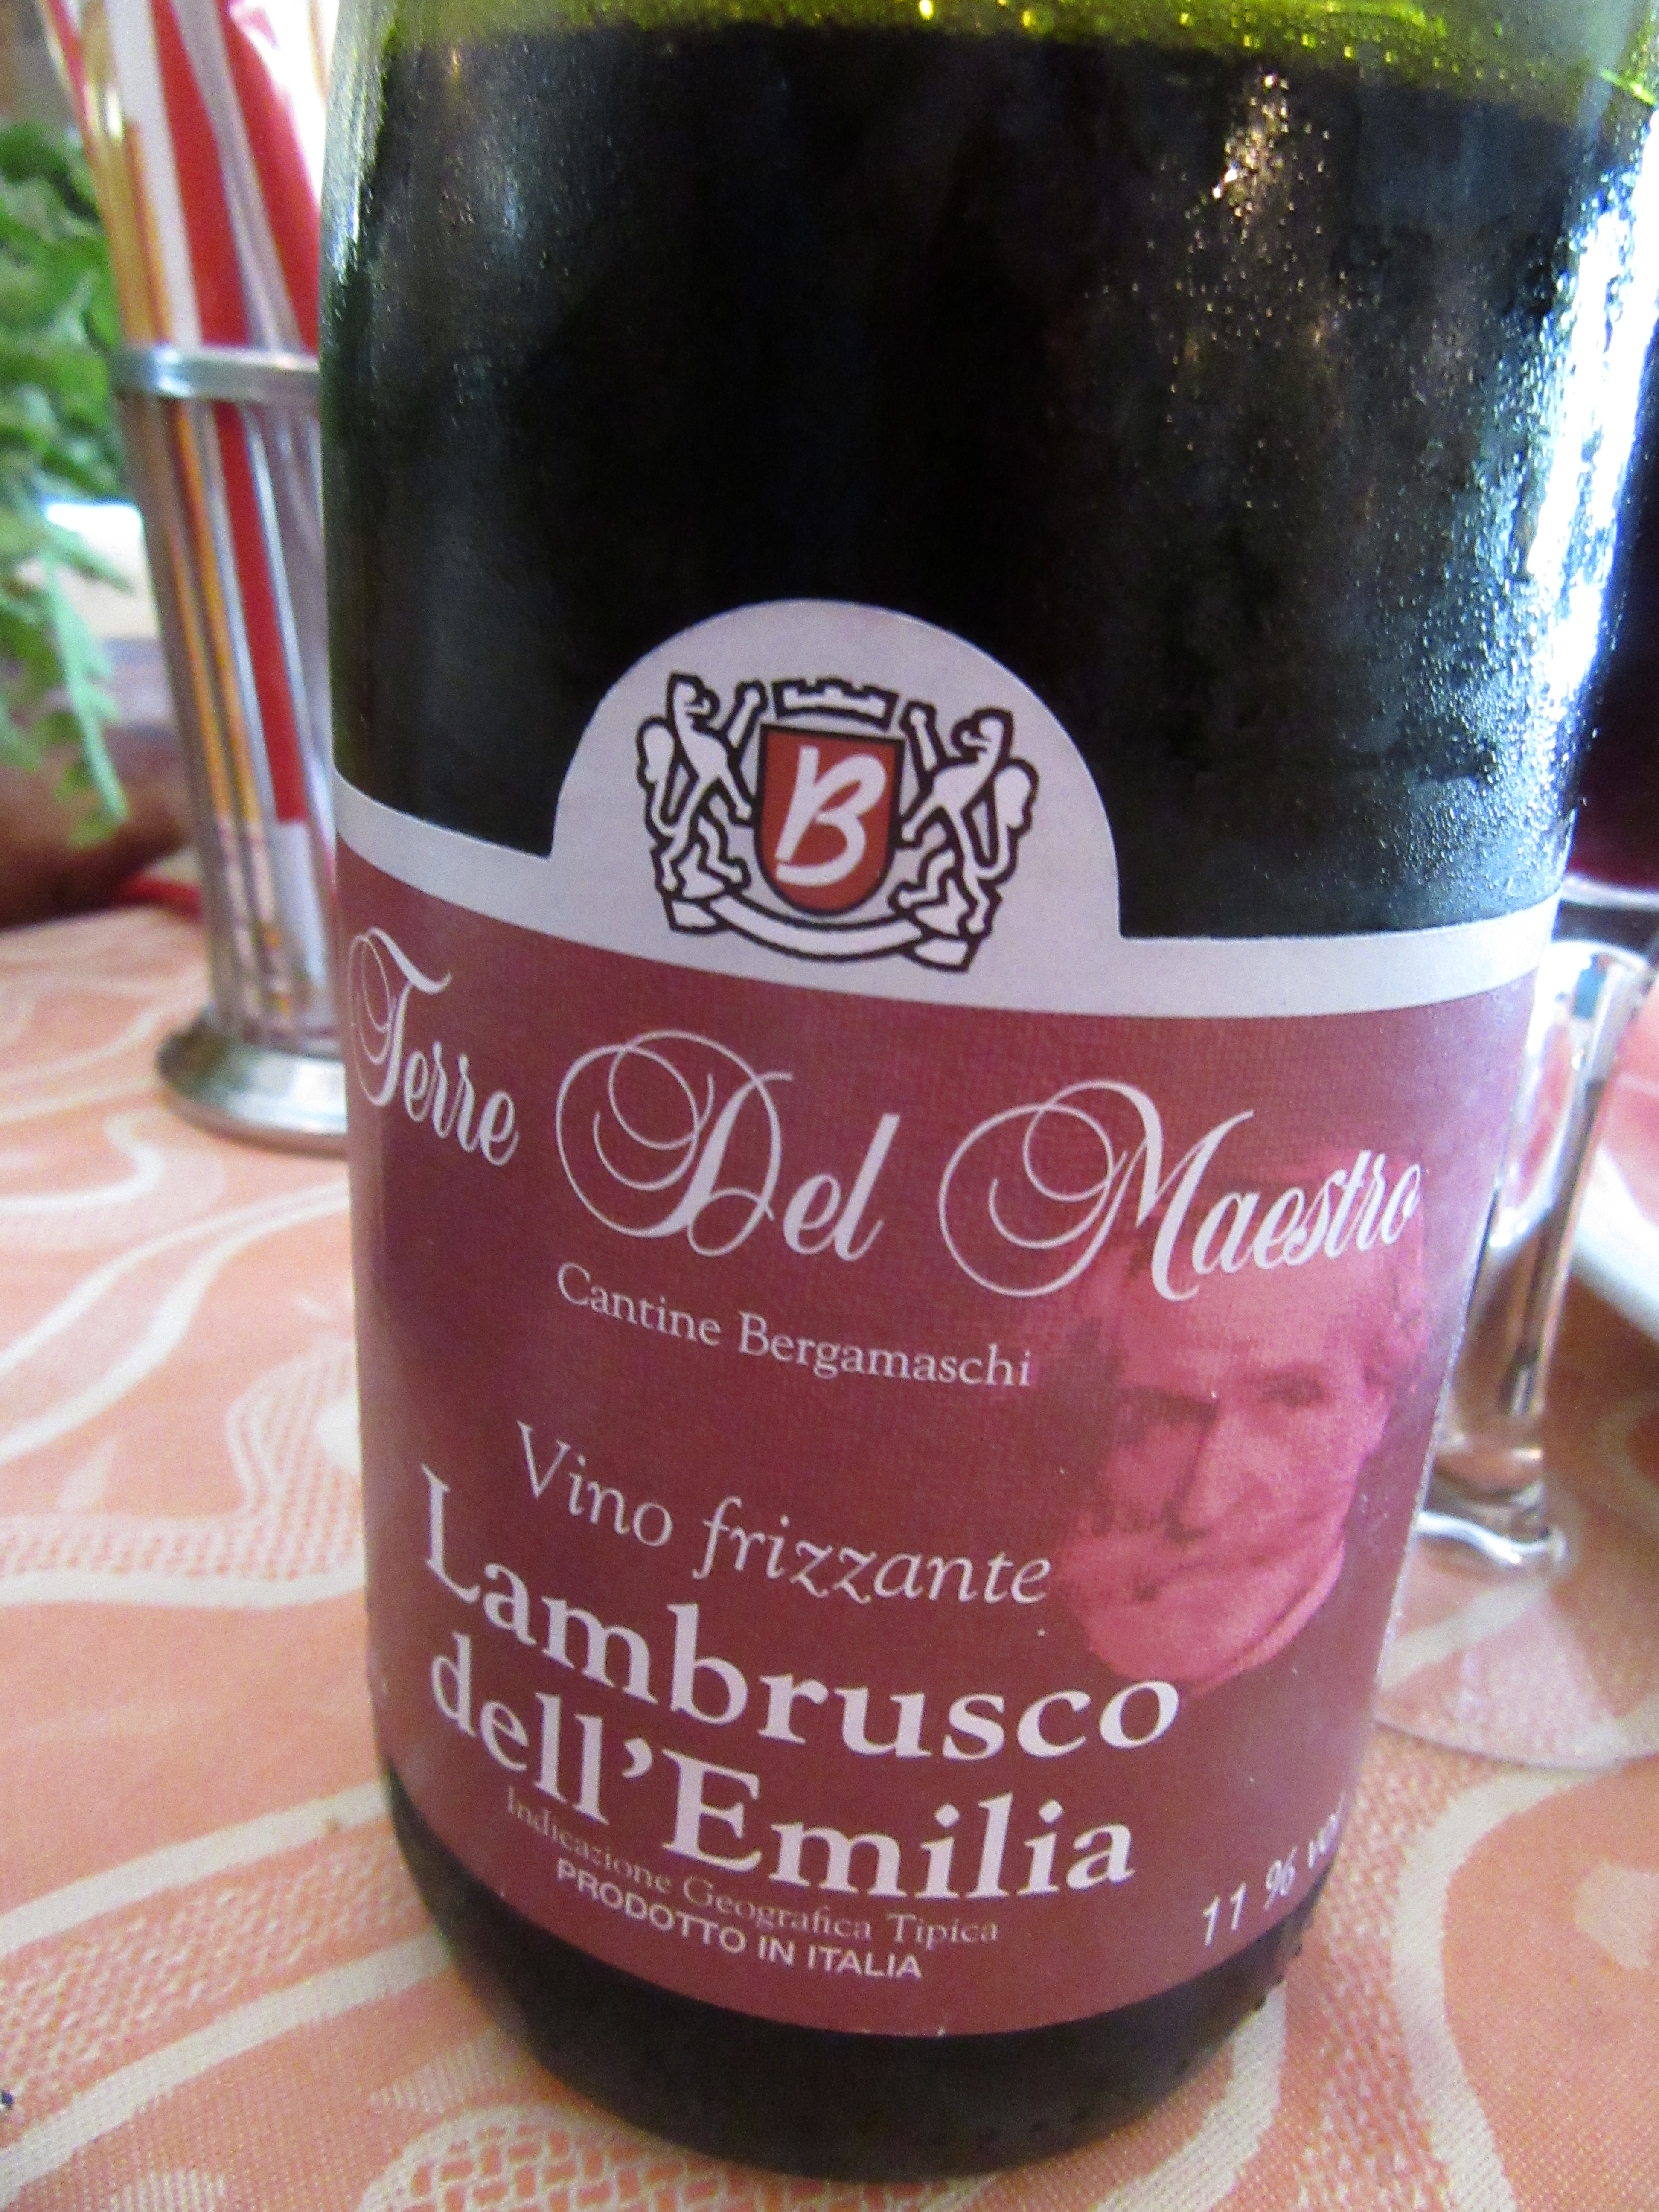 Lambrusco is not a great wine, but it's a lot better than what we see